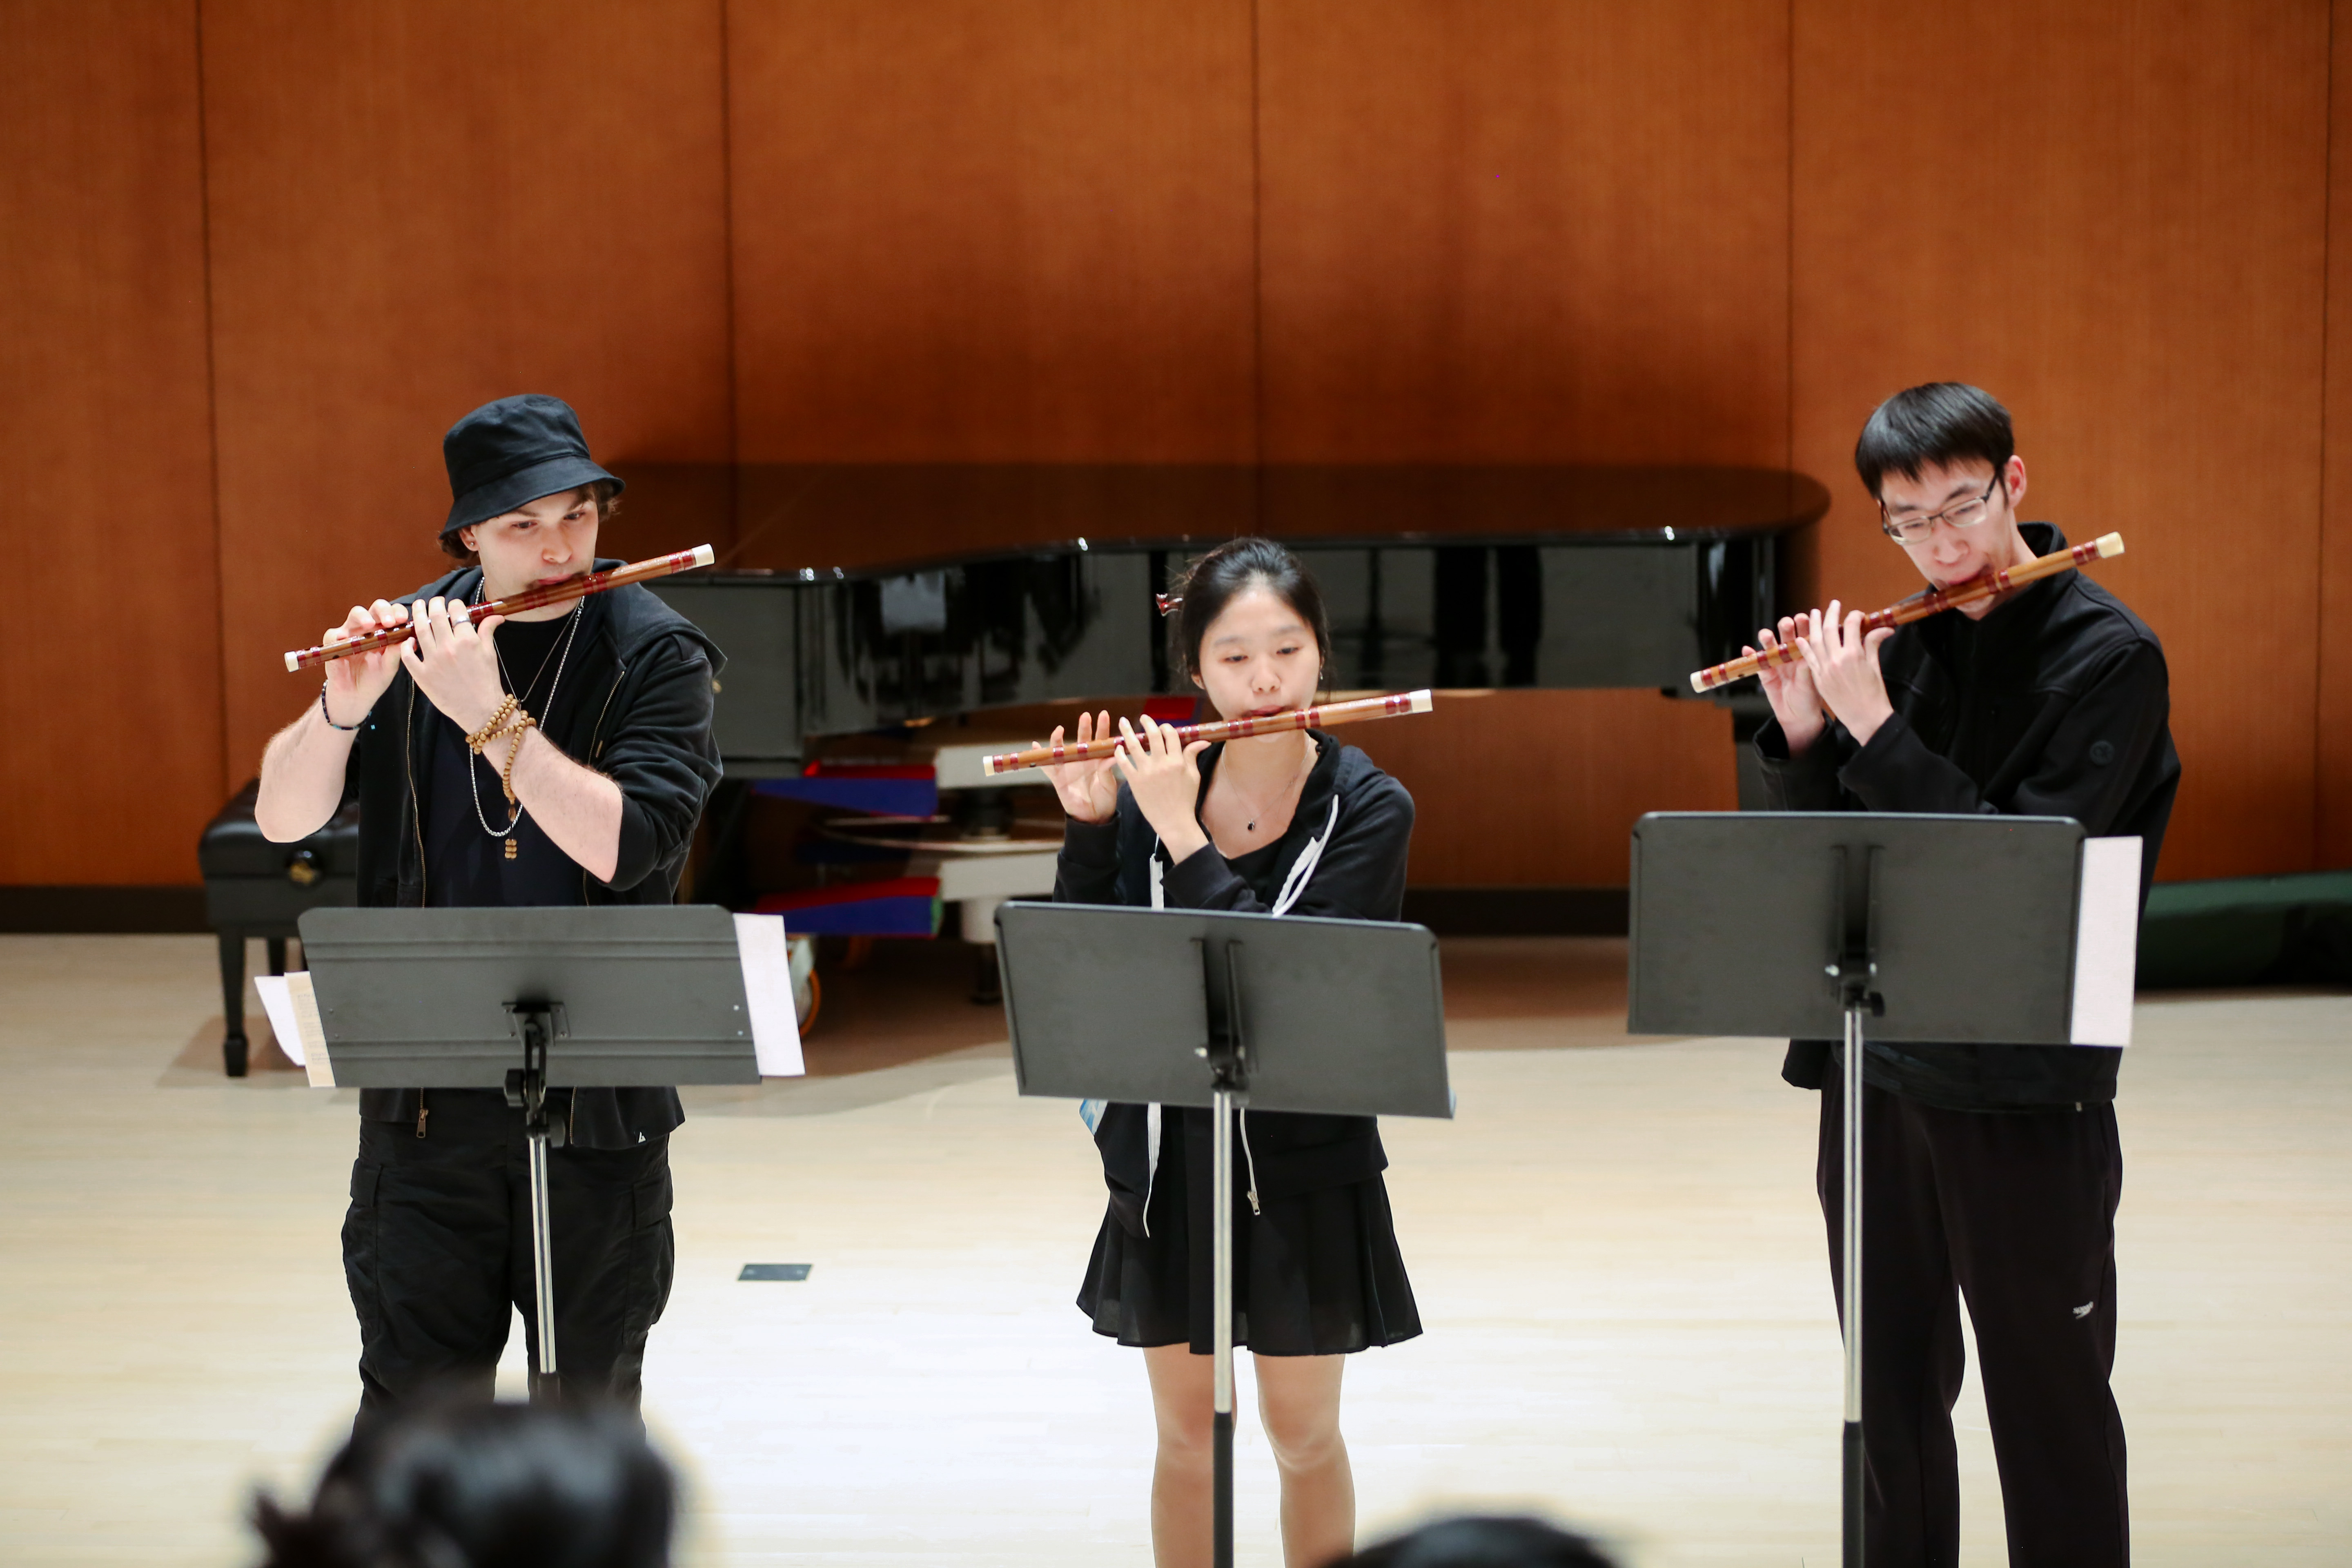 Three people wearing black play bamboo flute